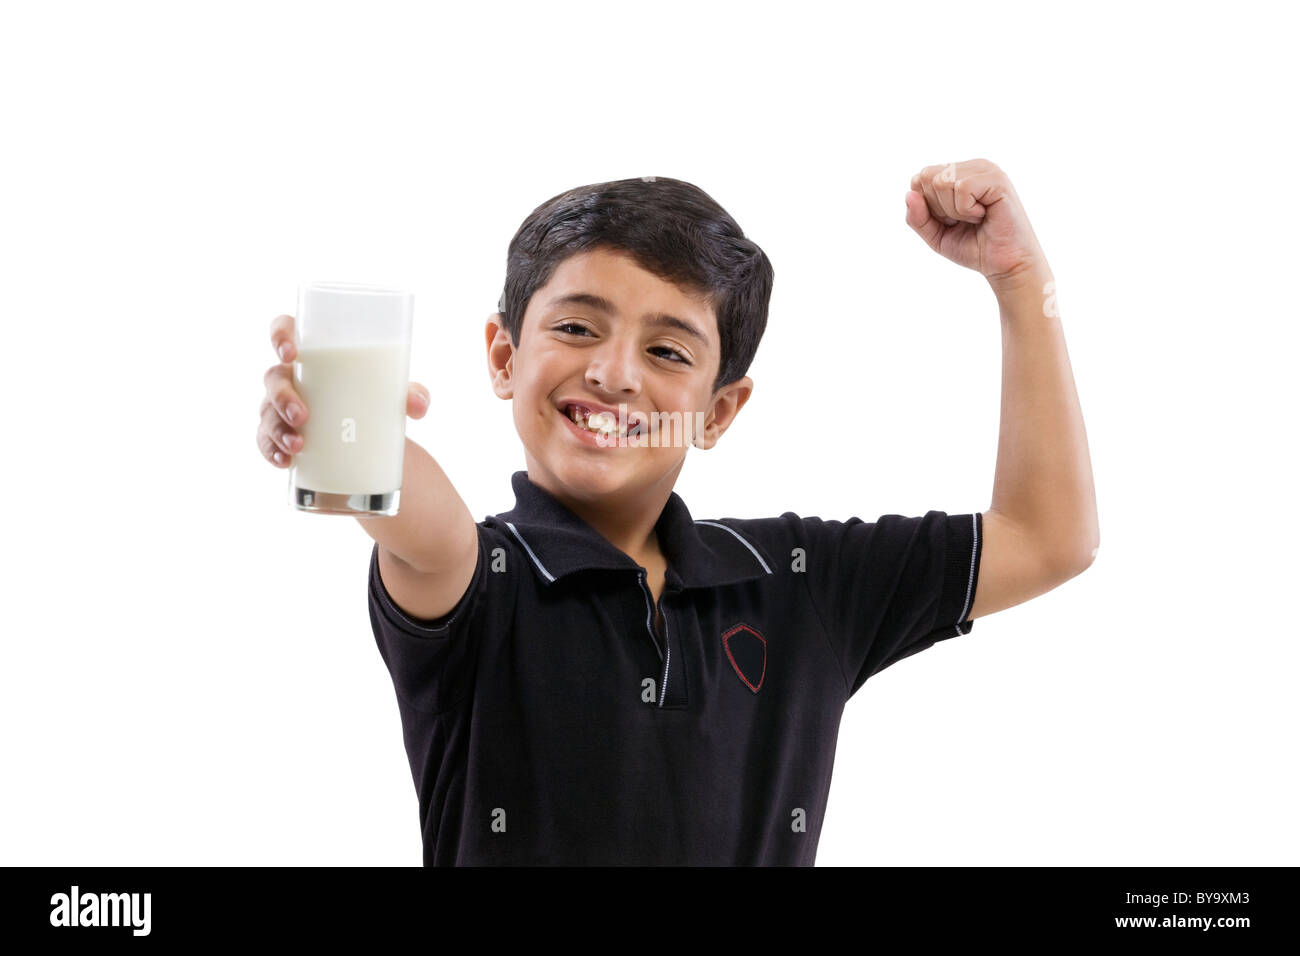 Young boy flexing his arm while holding a glass of milk Stock Photo